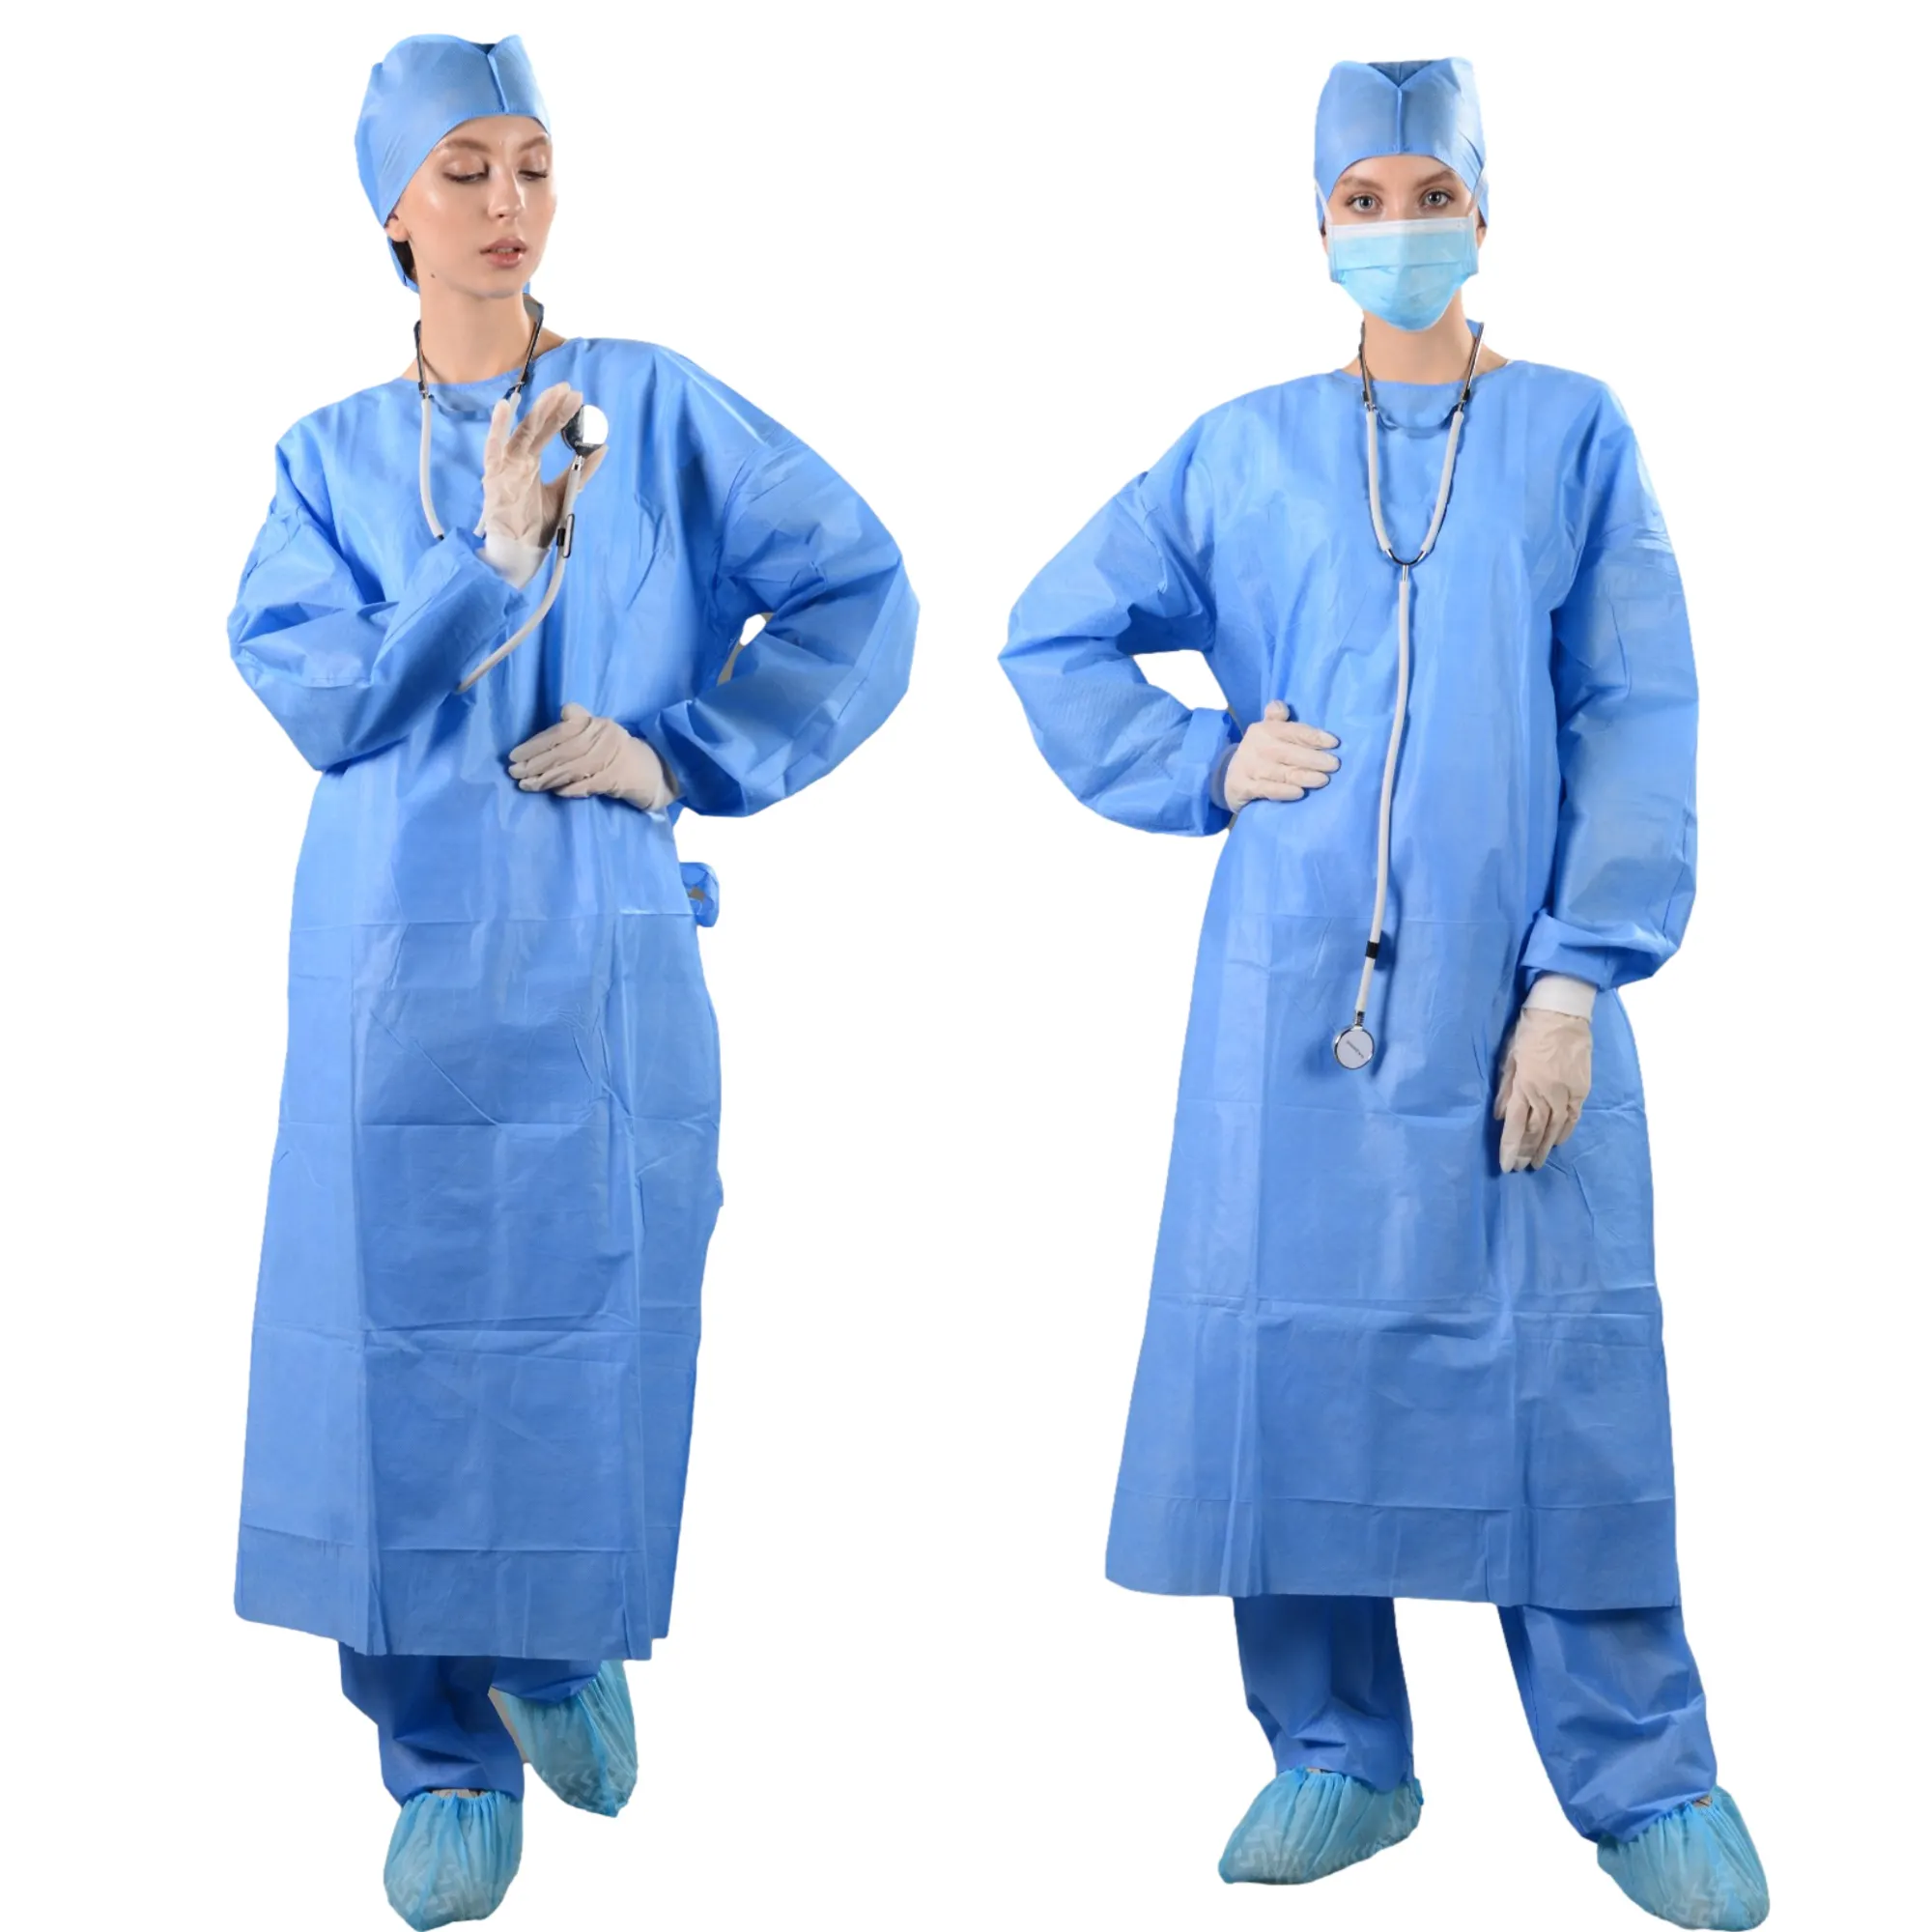 EN13795 Hospital Gowns AAMI Medical Disposable surgical Gown Non-Woven SMS Surgical Material PE & PP EOS Disinfecting Type